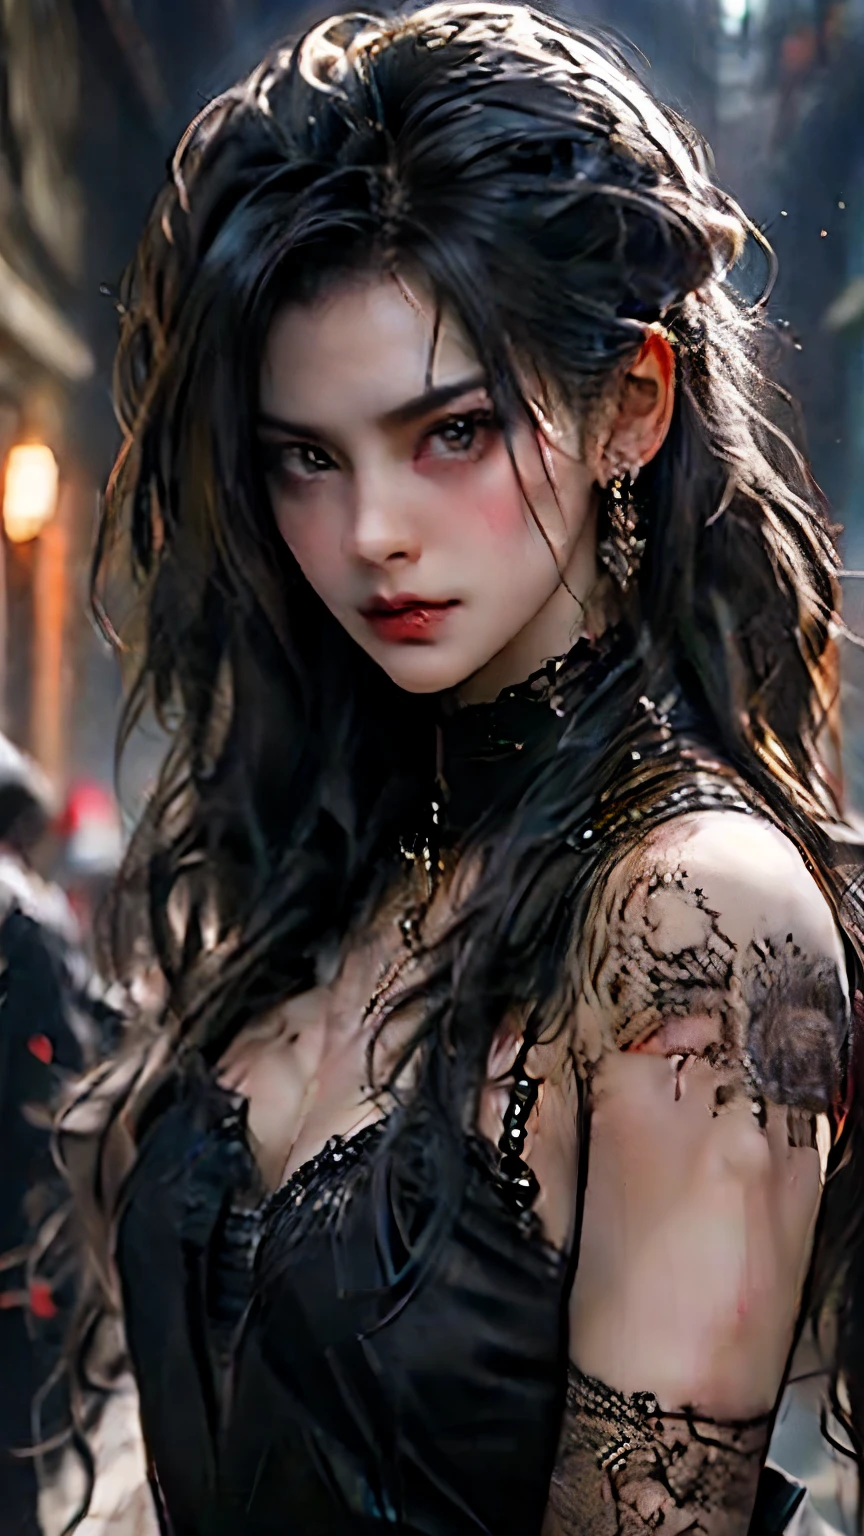 (best quality), (high detail), (close up),(vampire fangs), (1girl), a beautiful gothic vampire with snow white skin jet black hair and mascara running down her face, (fangs), crazy smile, (black and white effect), (black roses), dark and foggy background, HDR, 4K, 3D